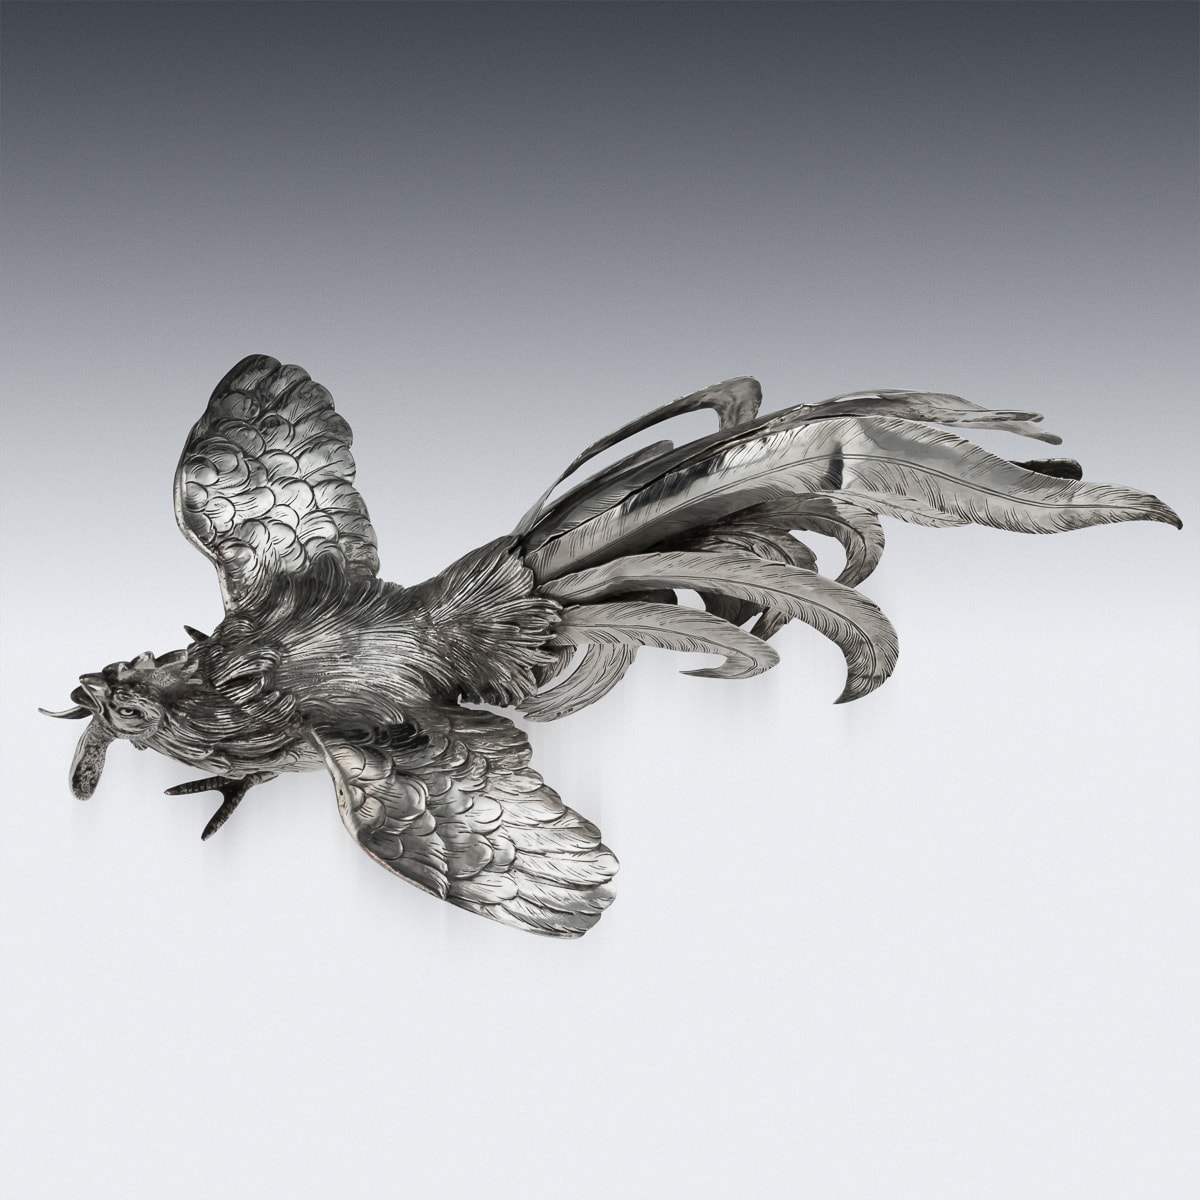 A PAIR OF GERMAN SILVER TABLE ORNAMENTS MODELLED AS FIGHTING COCKERELS - Image 18 of 41